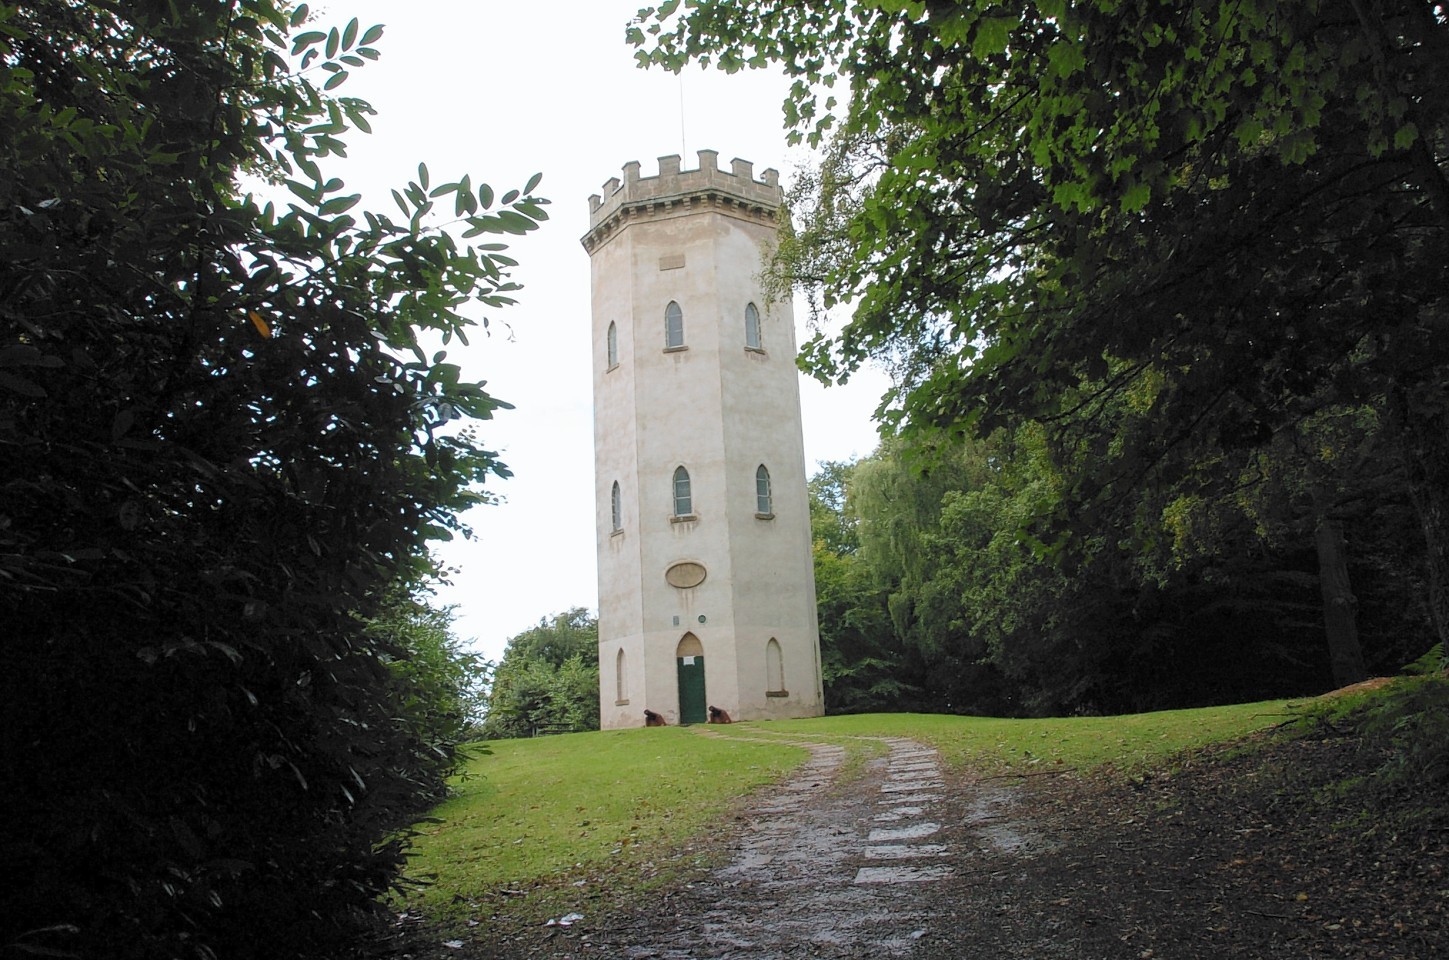 Nelson’s Tower was one of venues at last year's Doors Open Day festival.